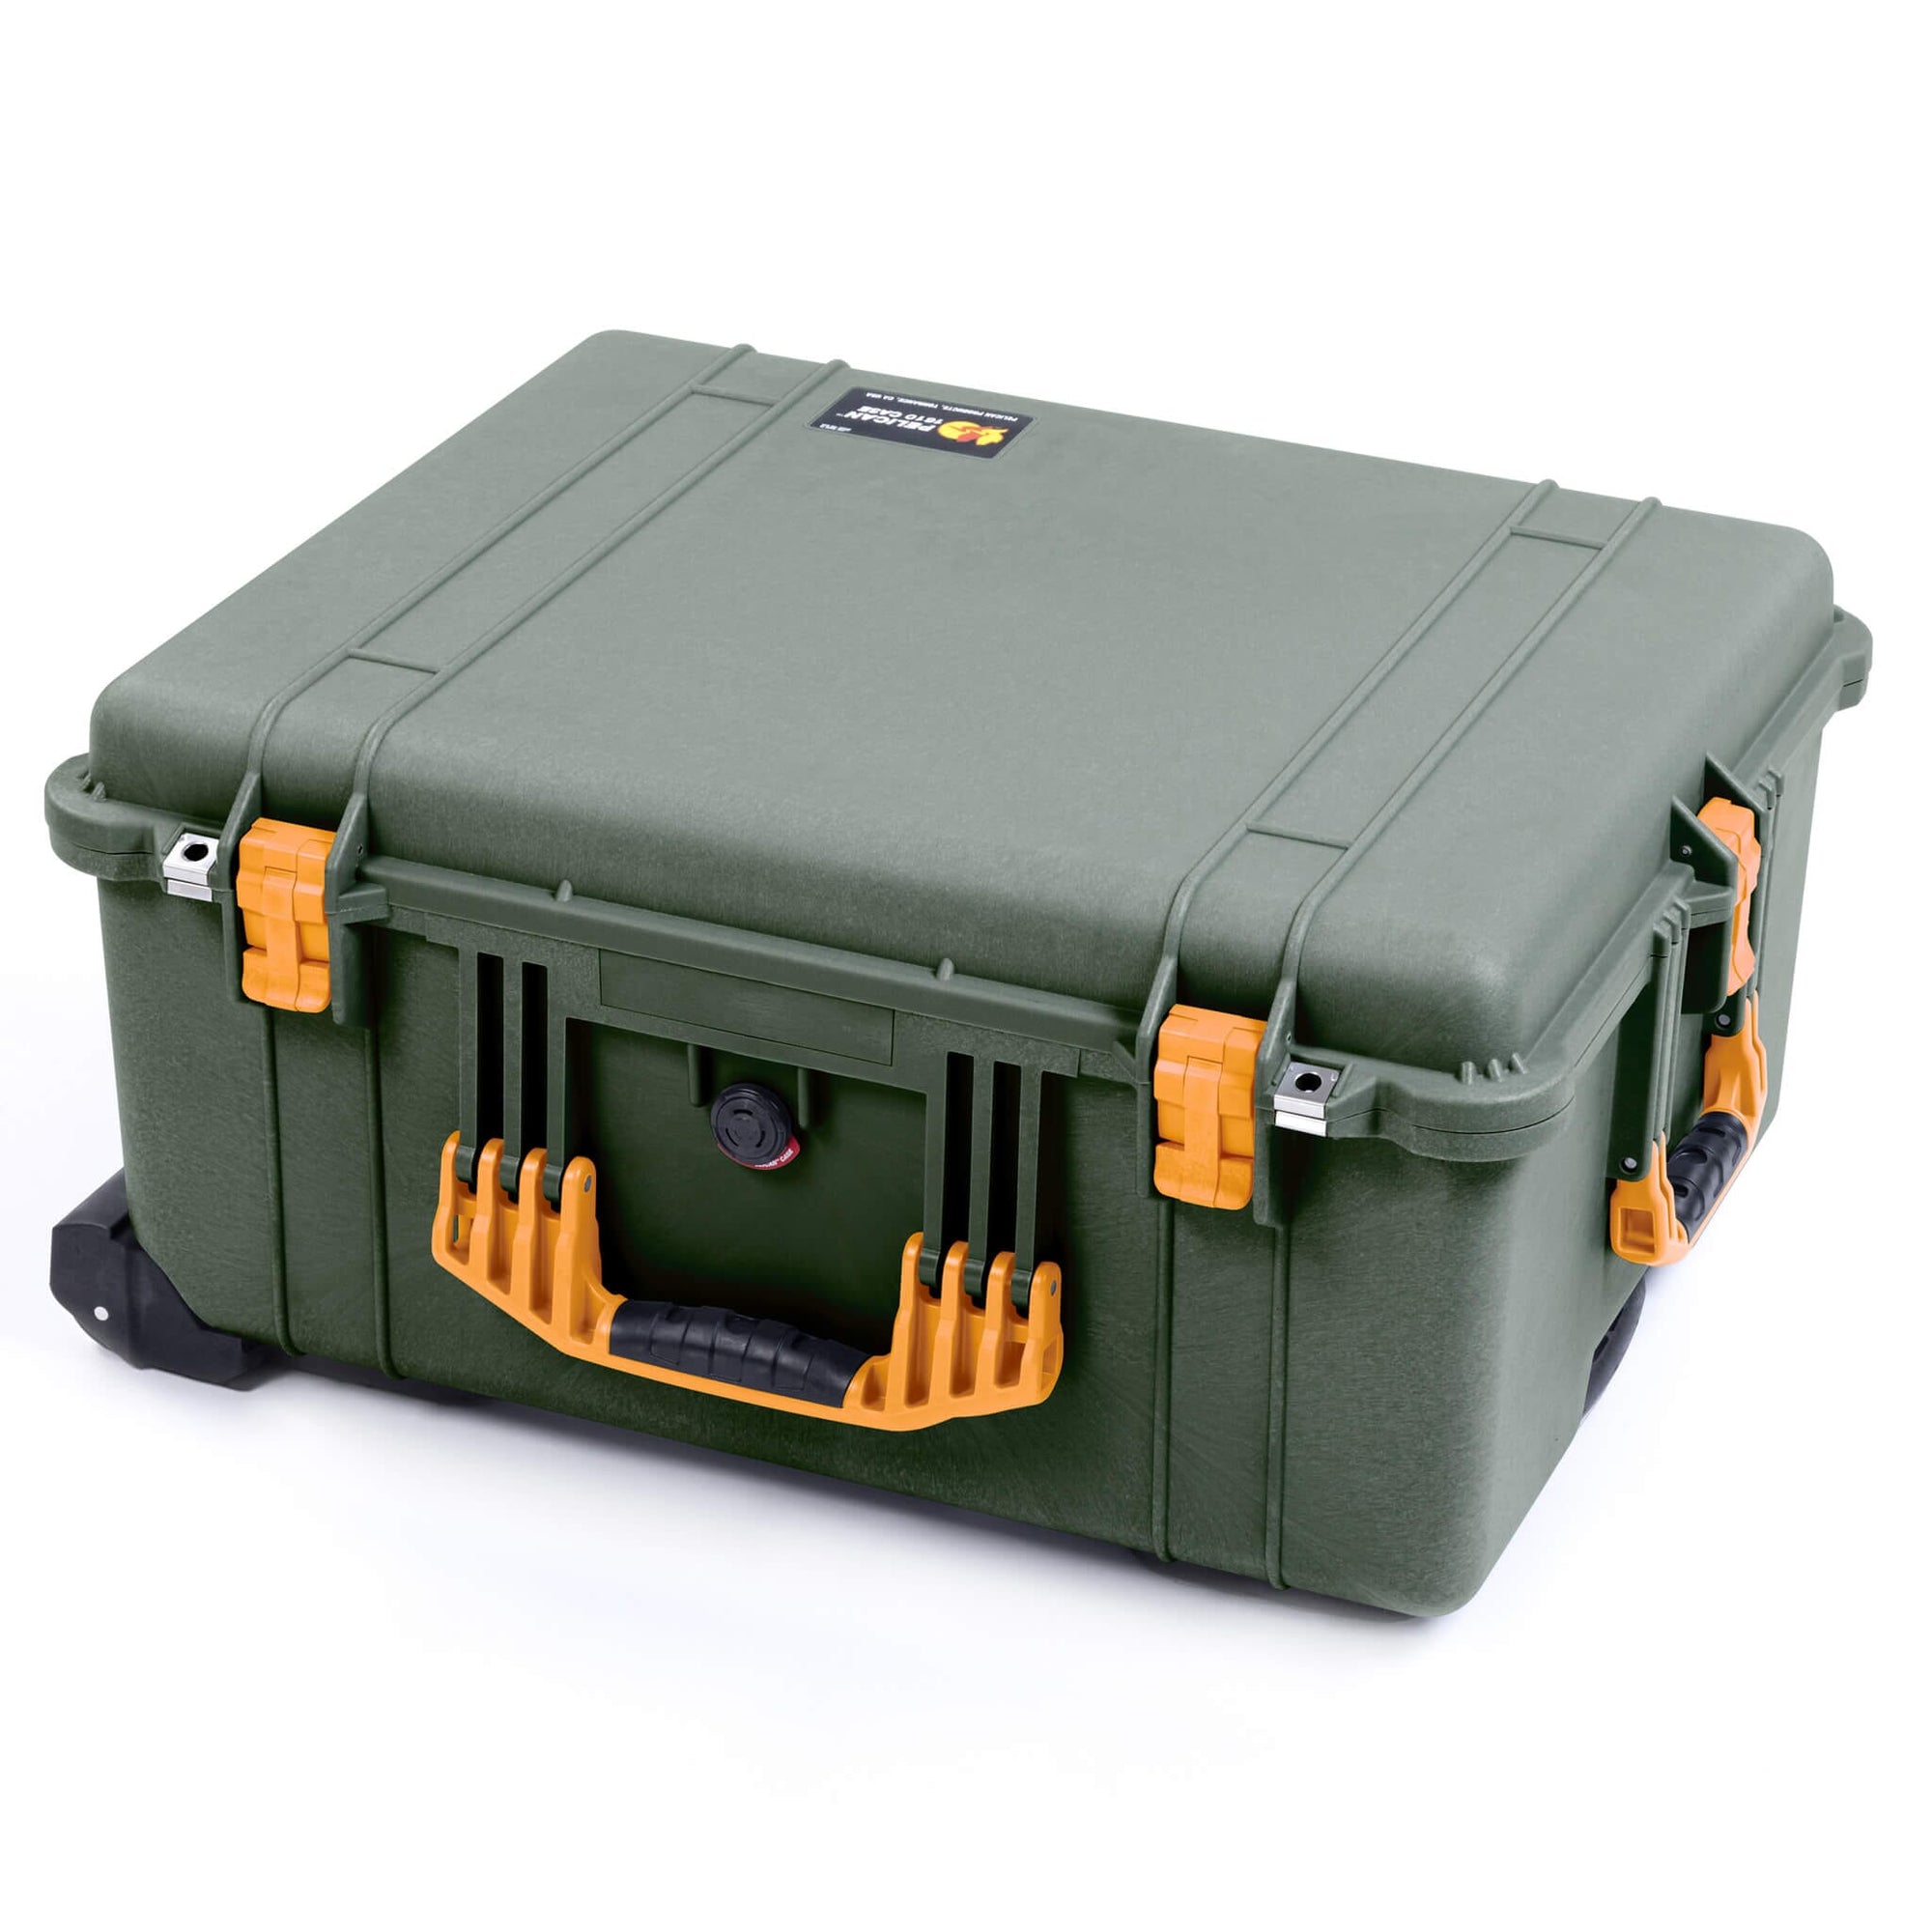 Pelican 1610 Case, OD Green with Yellow Handles and Latches ColorCase 